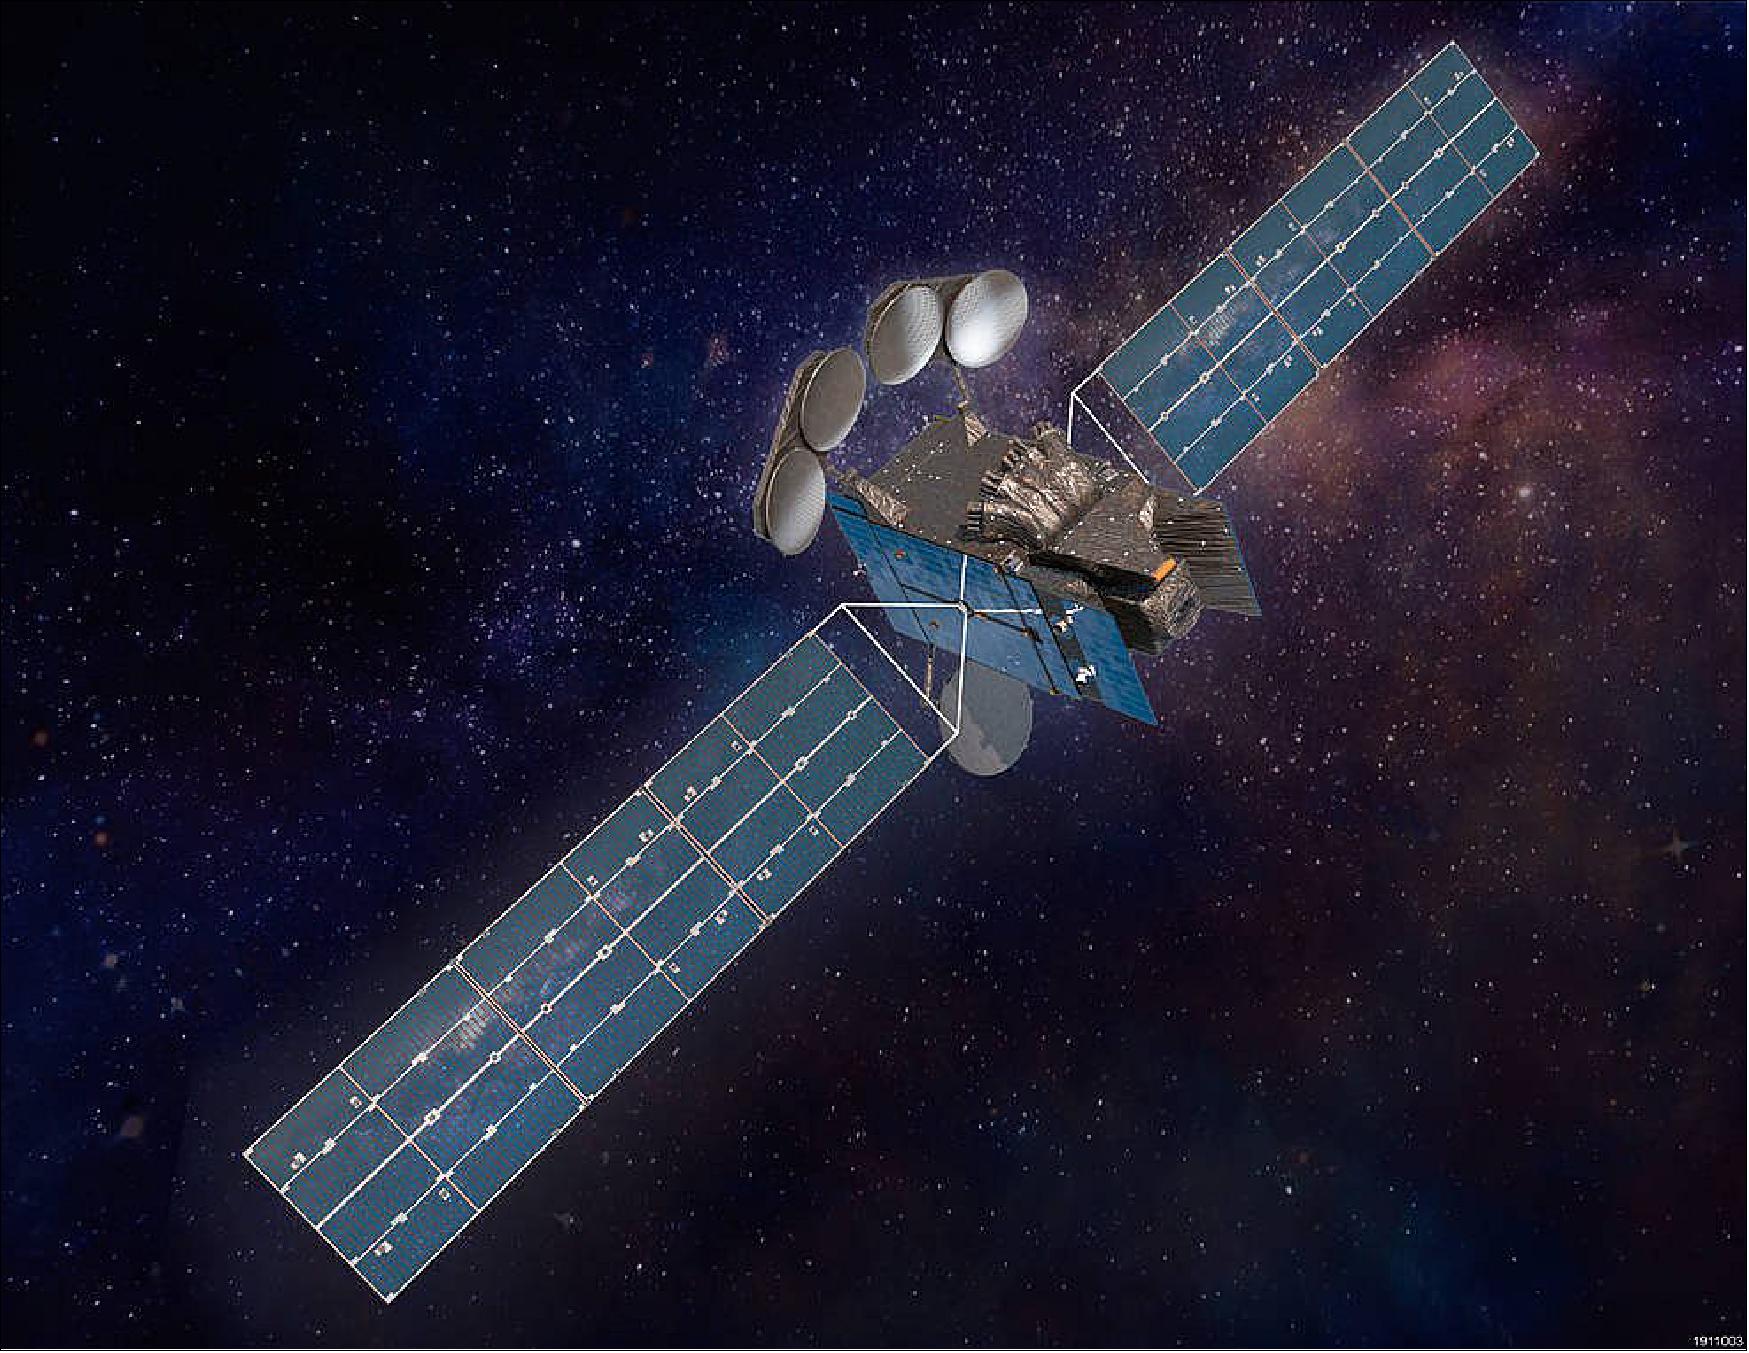 Figure 10: Artist's rendition of the Intelsat-40e spacecraft in orbit carrying the TEMPO instrument as a hosted payload (image credit: NASA)